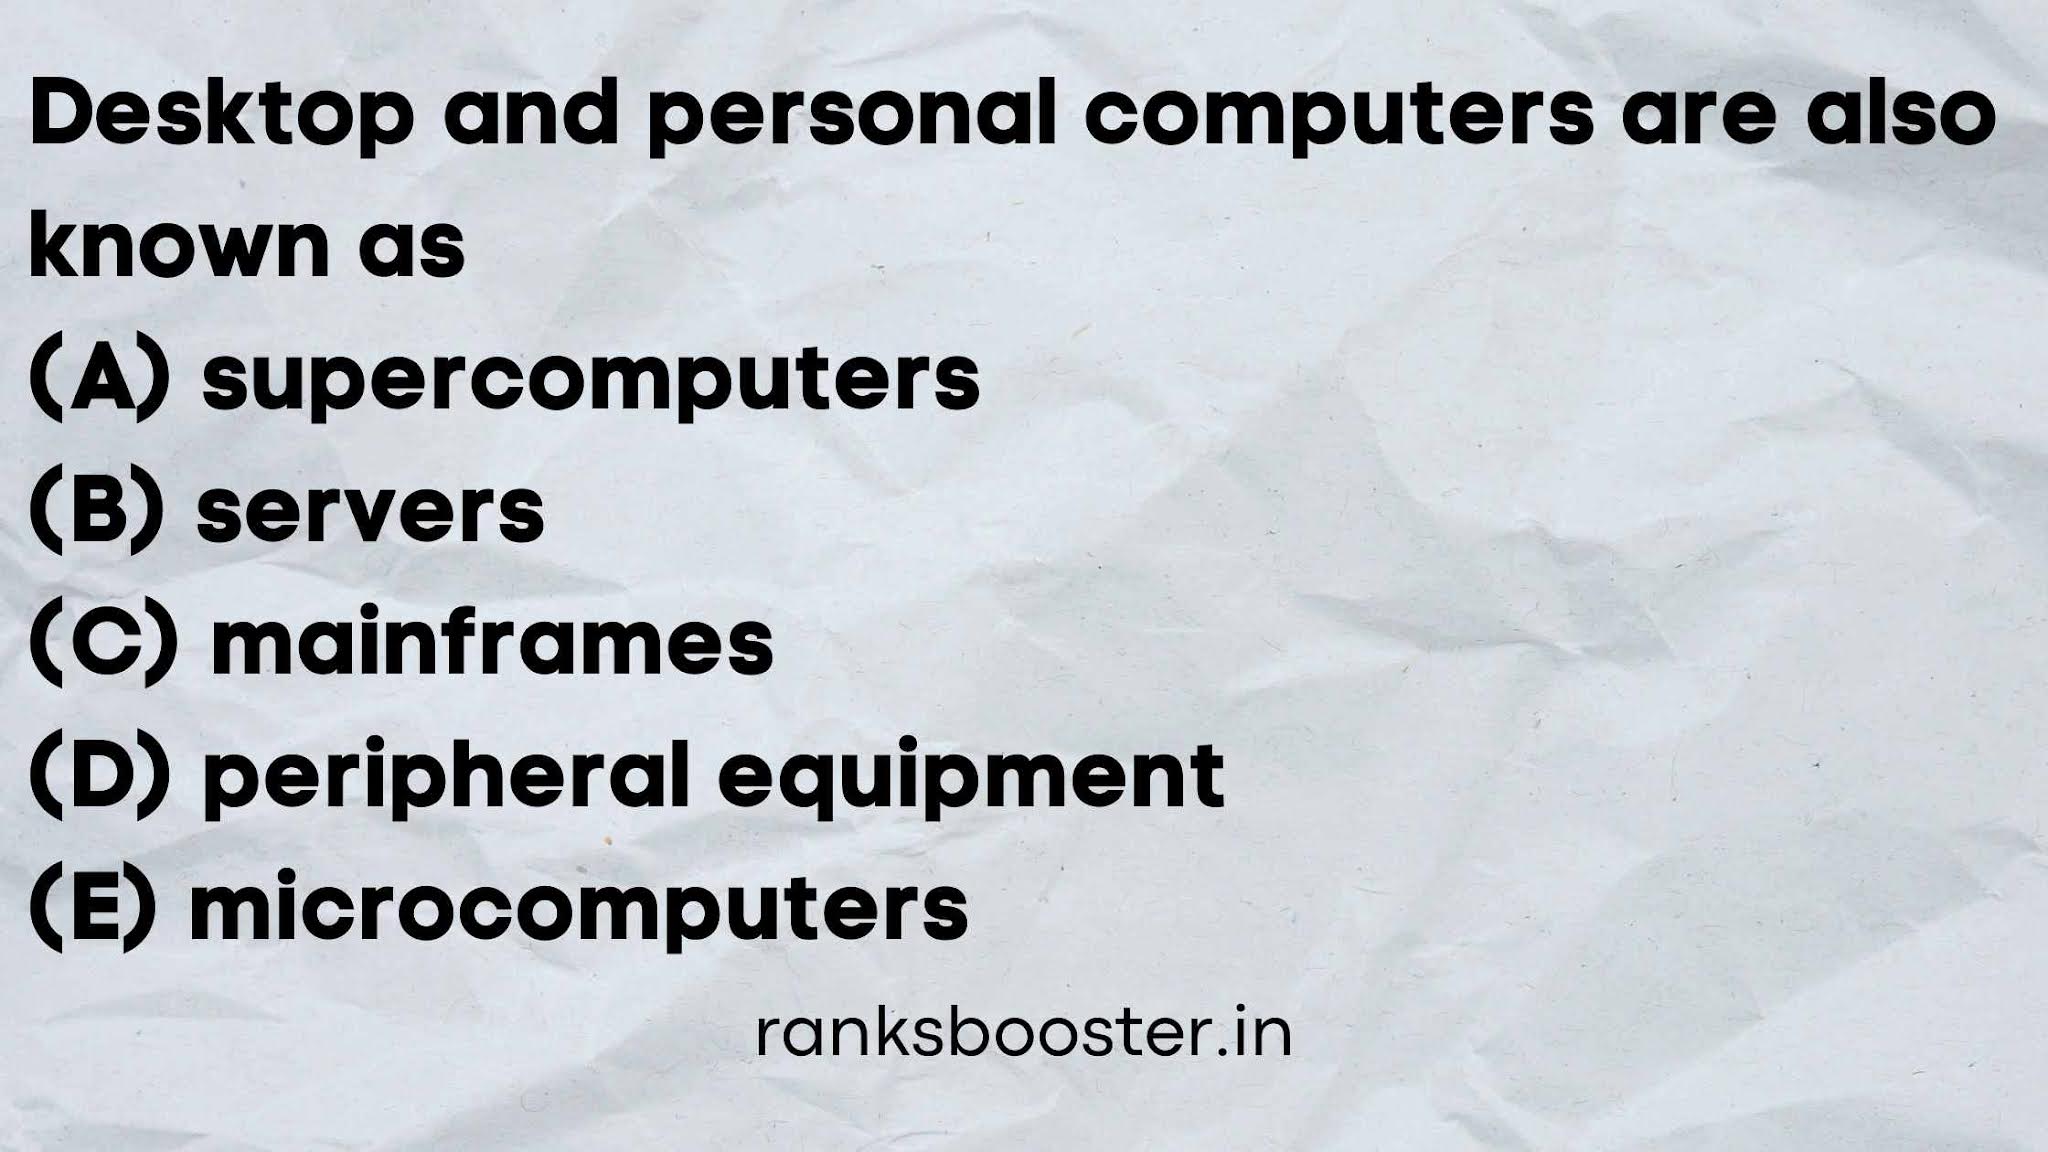 Desktop and personal computers are also known as (A) supercomputers (B) servers (C) mainframes (D) peripheral equipment (E) microcomputers